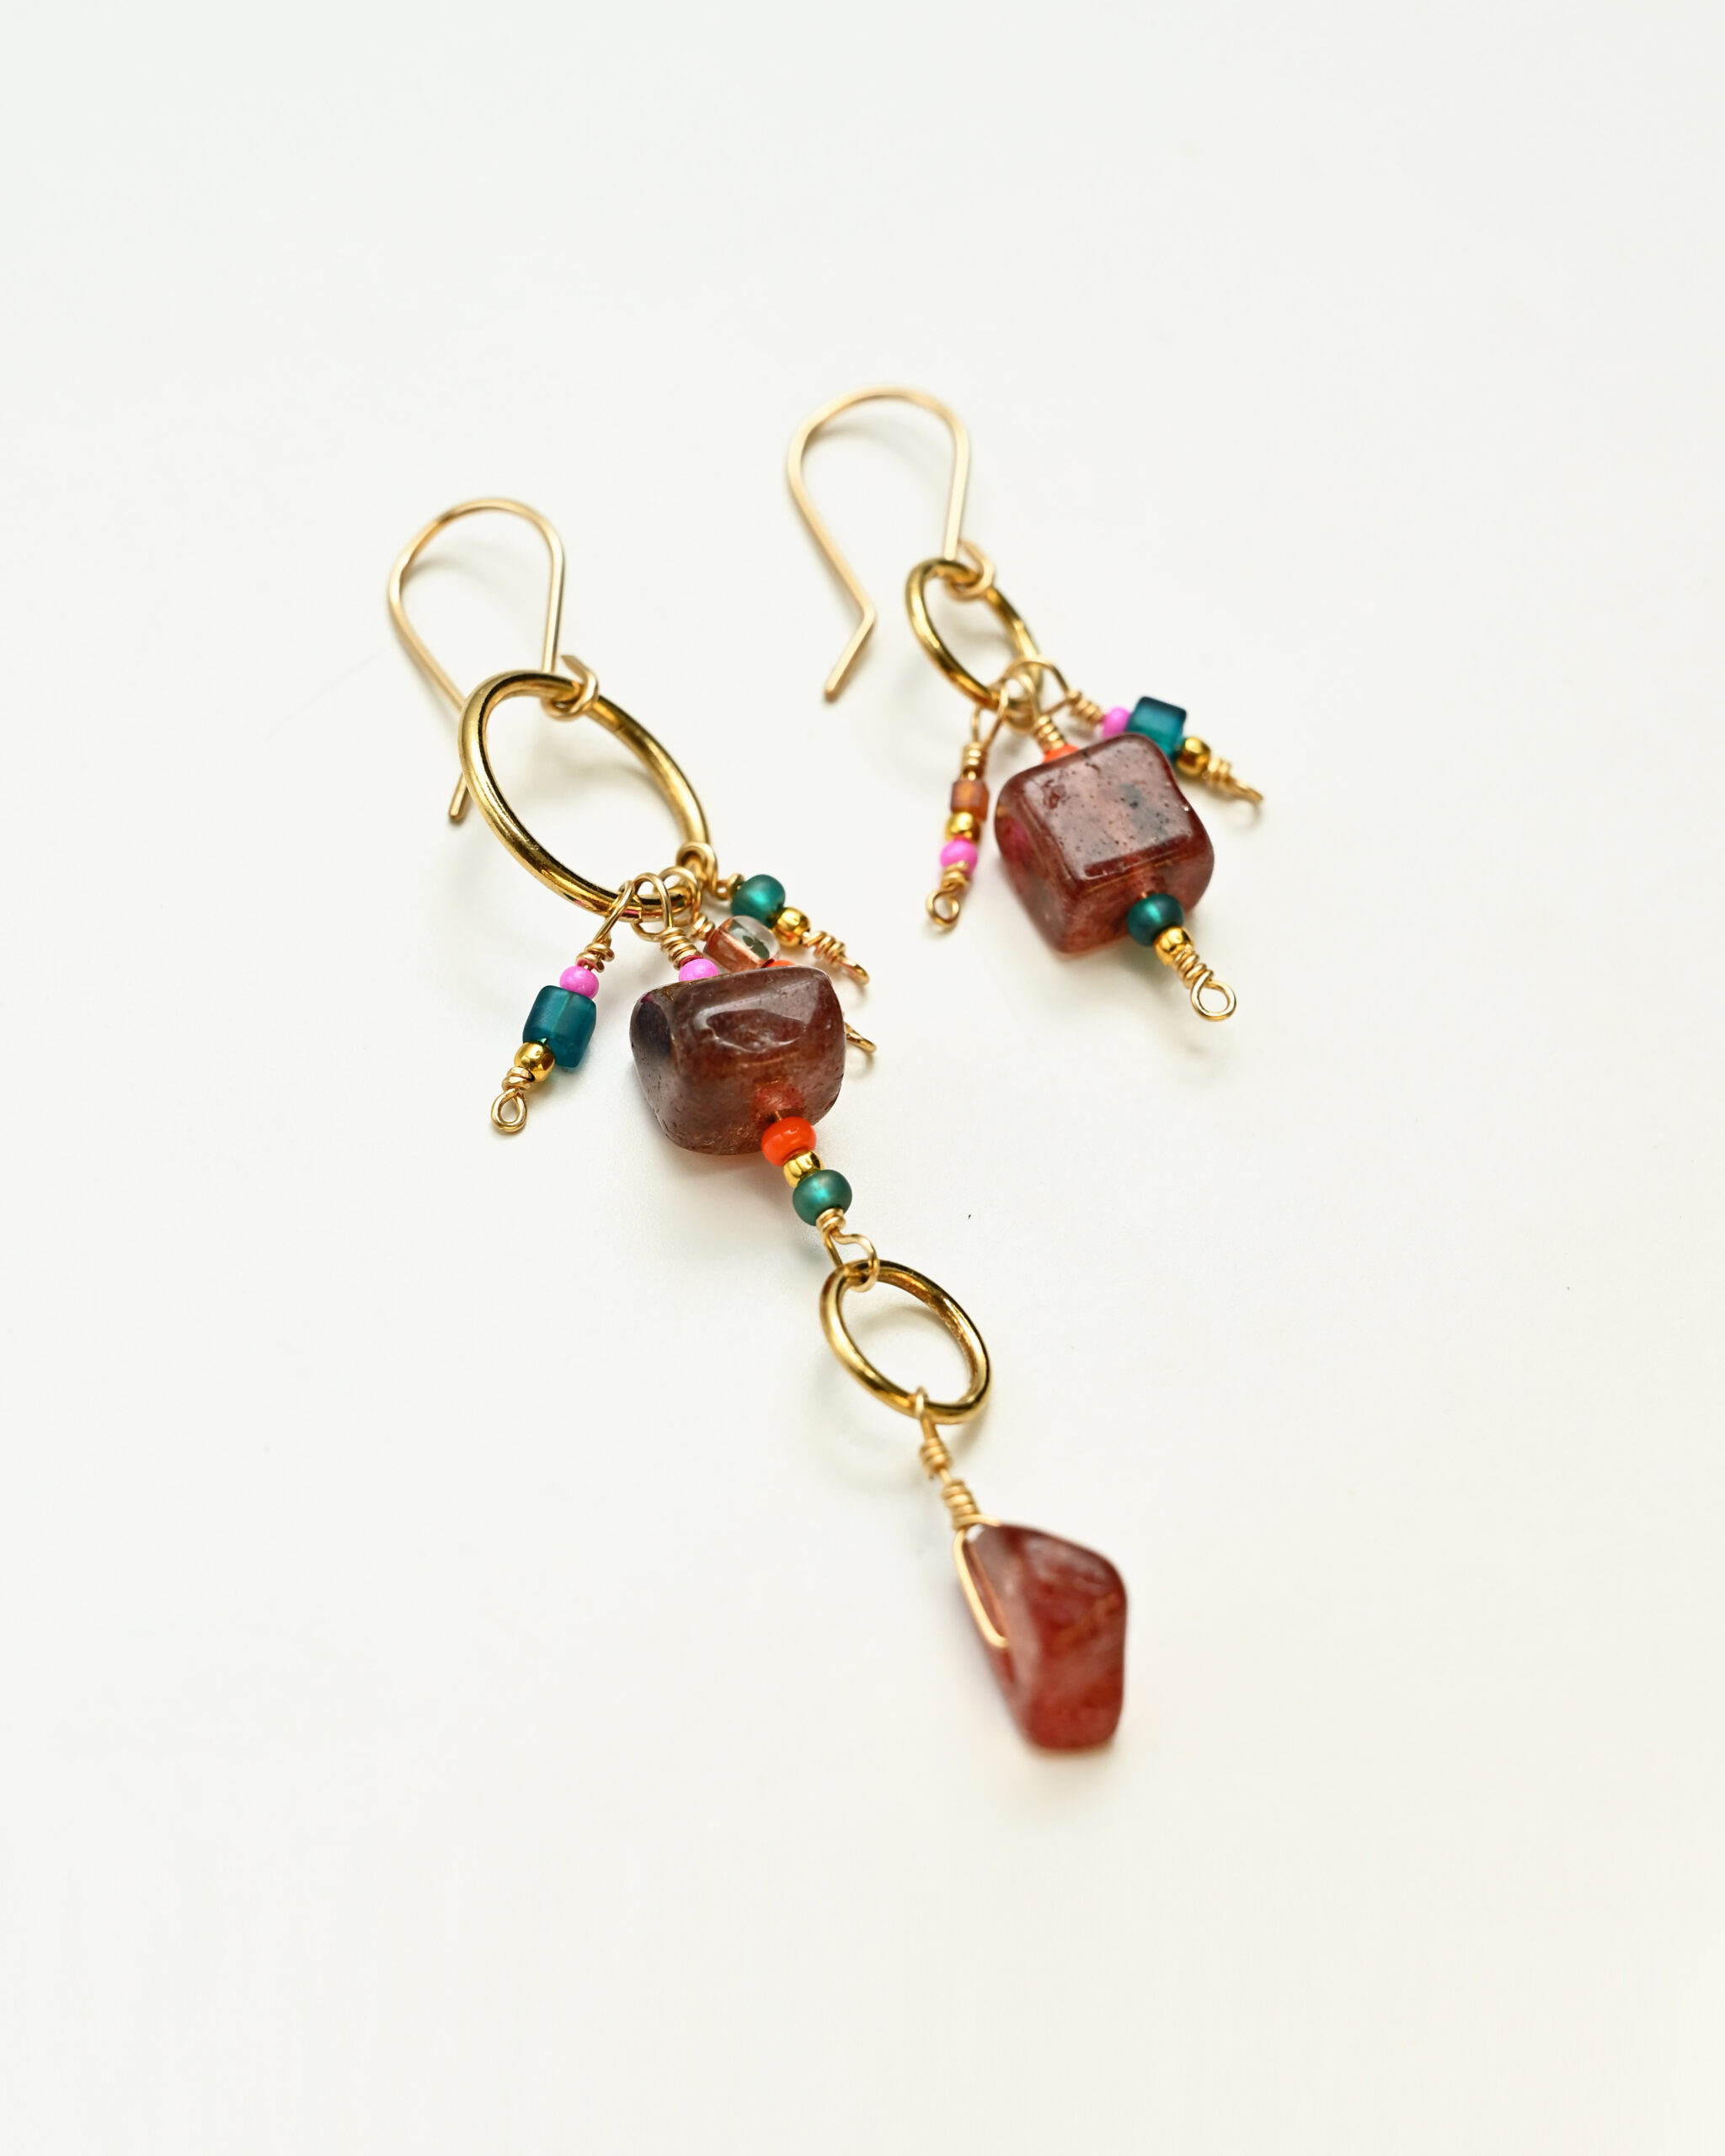 14k gold filled drop earrings with raspberry quartz gemstone, japanese beads and 18k gold plated sterling silver elements